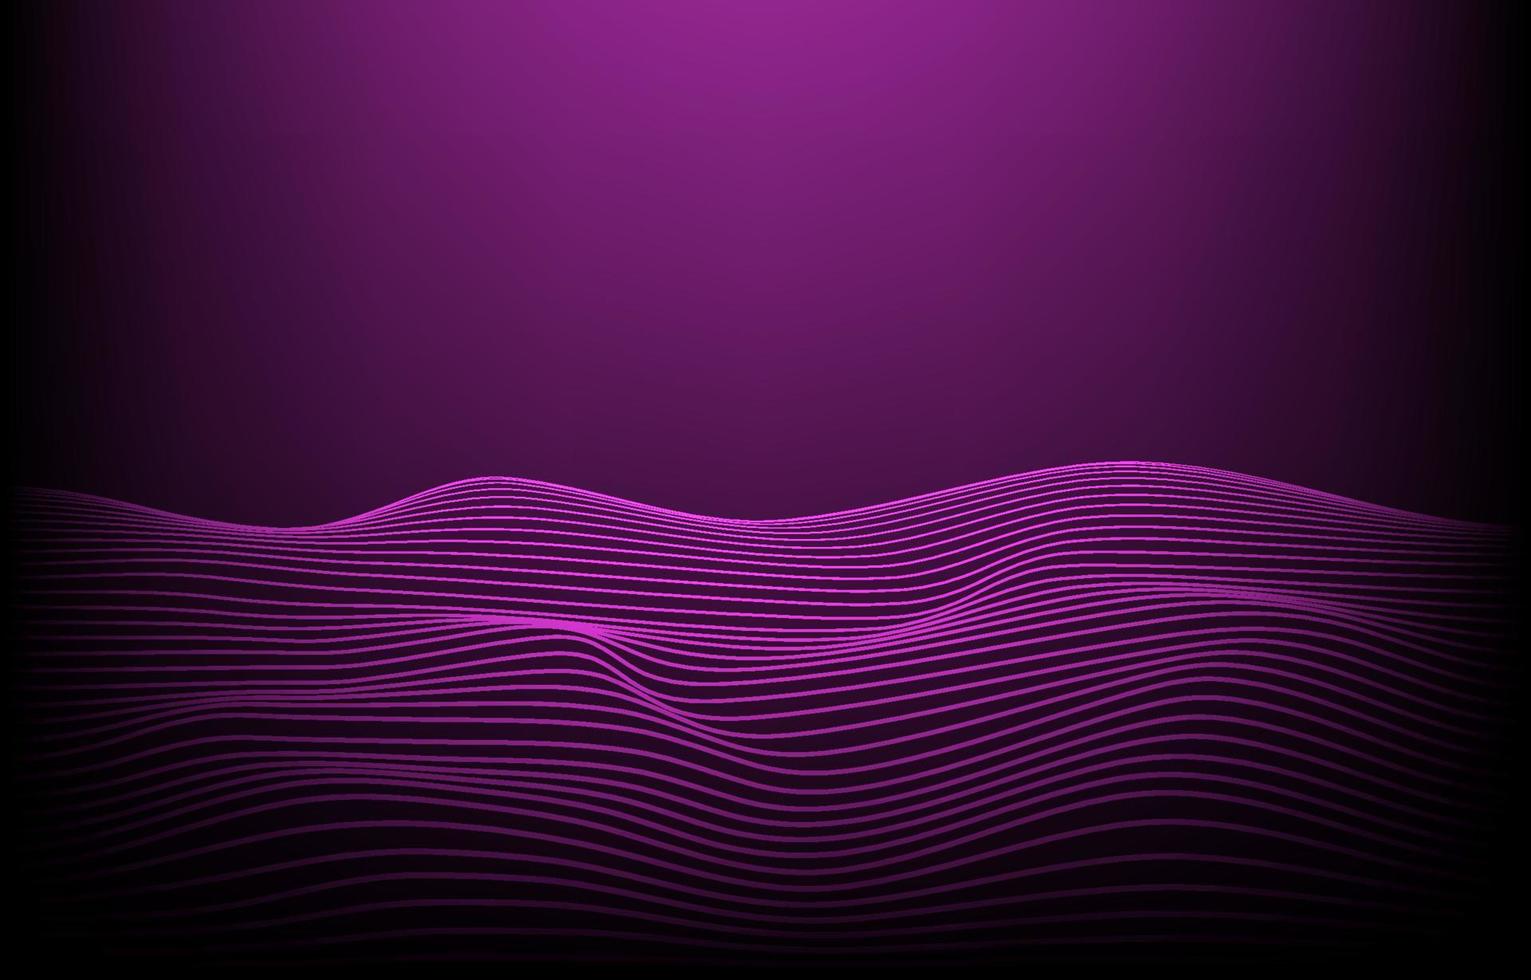 Abstract wave wavy glow line on gradient purple background. Design for wallpaper, backdrop, pattern, texture, background, textile, wrapping, clothing, art print. Vector illustration.